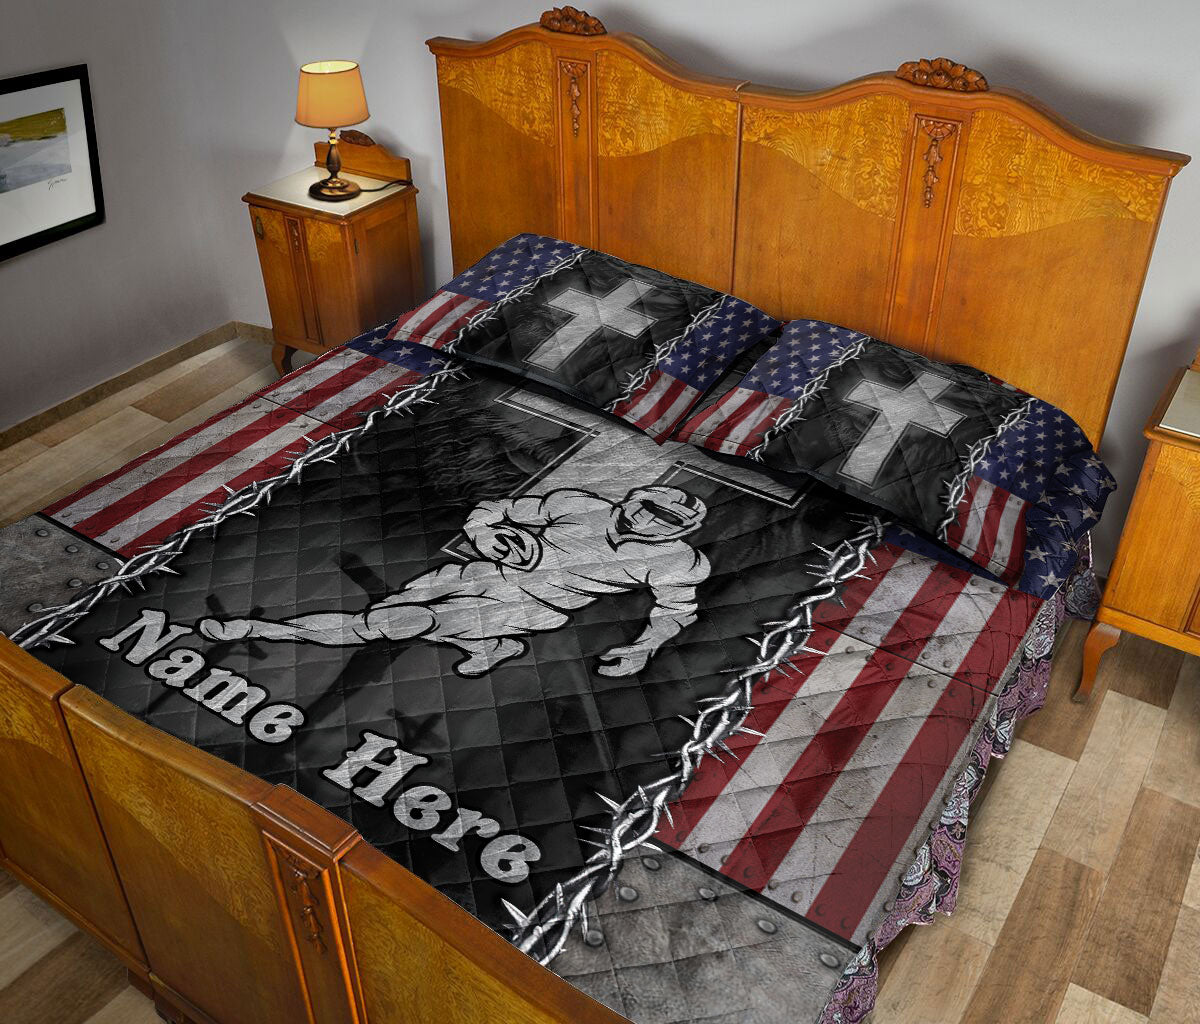 Ohaprints-Quilt-Bed-Set-Pillowcase-Football-God-Jesus-Cross-American-Us-Flag-Christian-Custom-Personalized-Name-Blanket-Bedspread-Bedding-946-Queen (80'' x 90'')